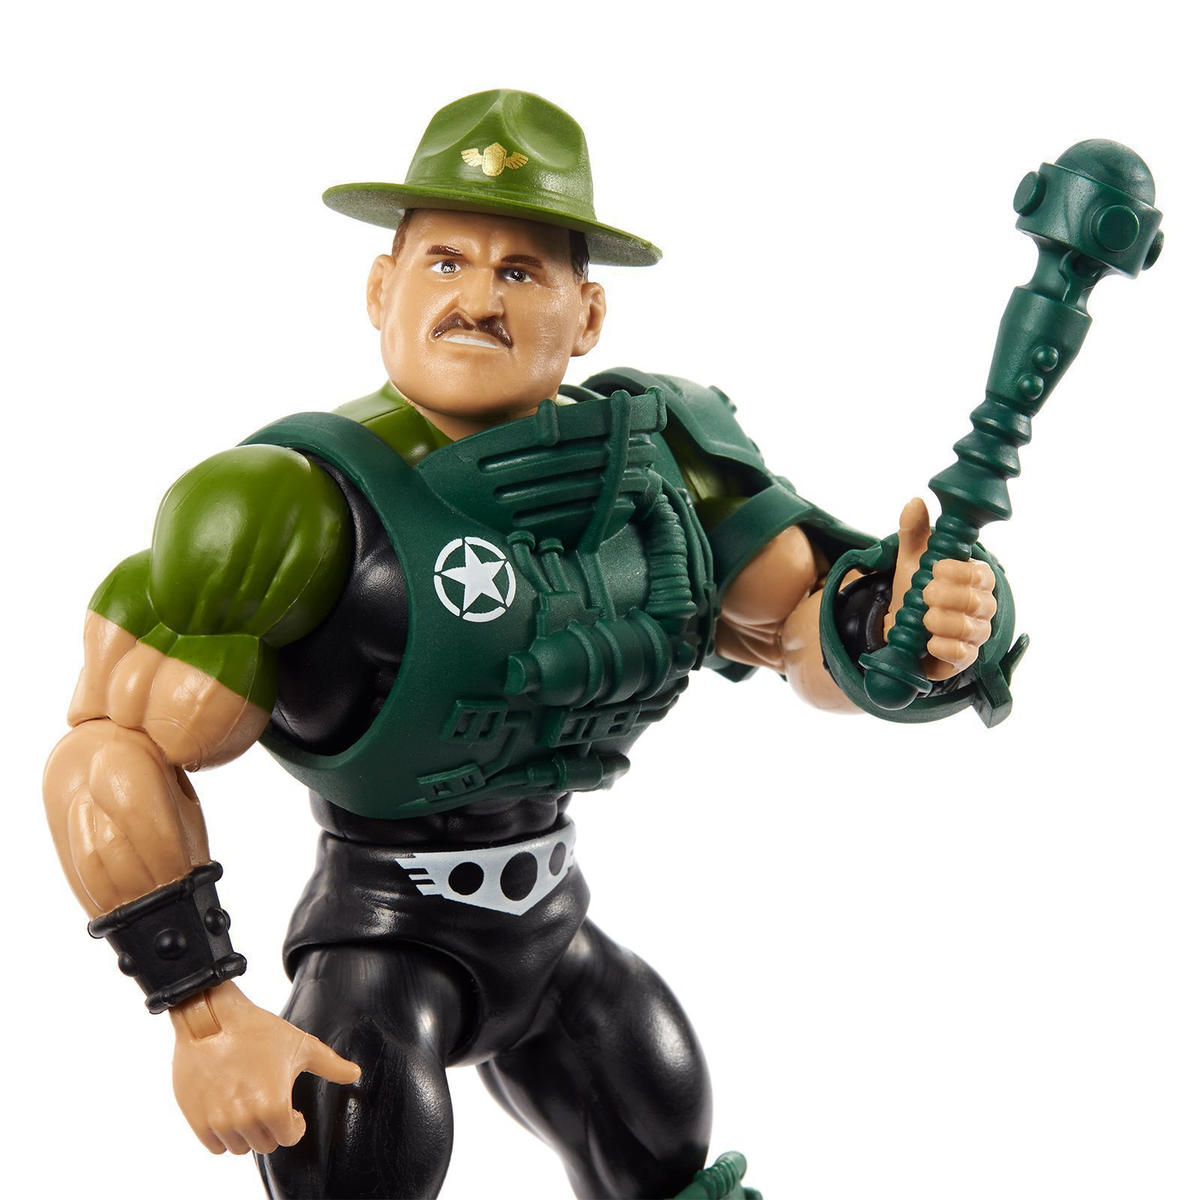 2021 Mattel Masters of the WWE Universe Series 7 Sgt. Slaughter [Exclusive]